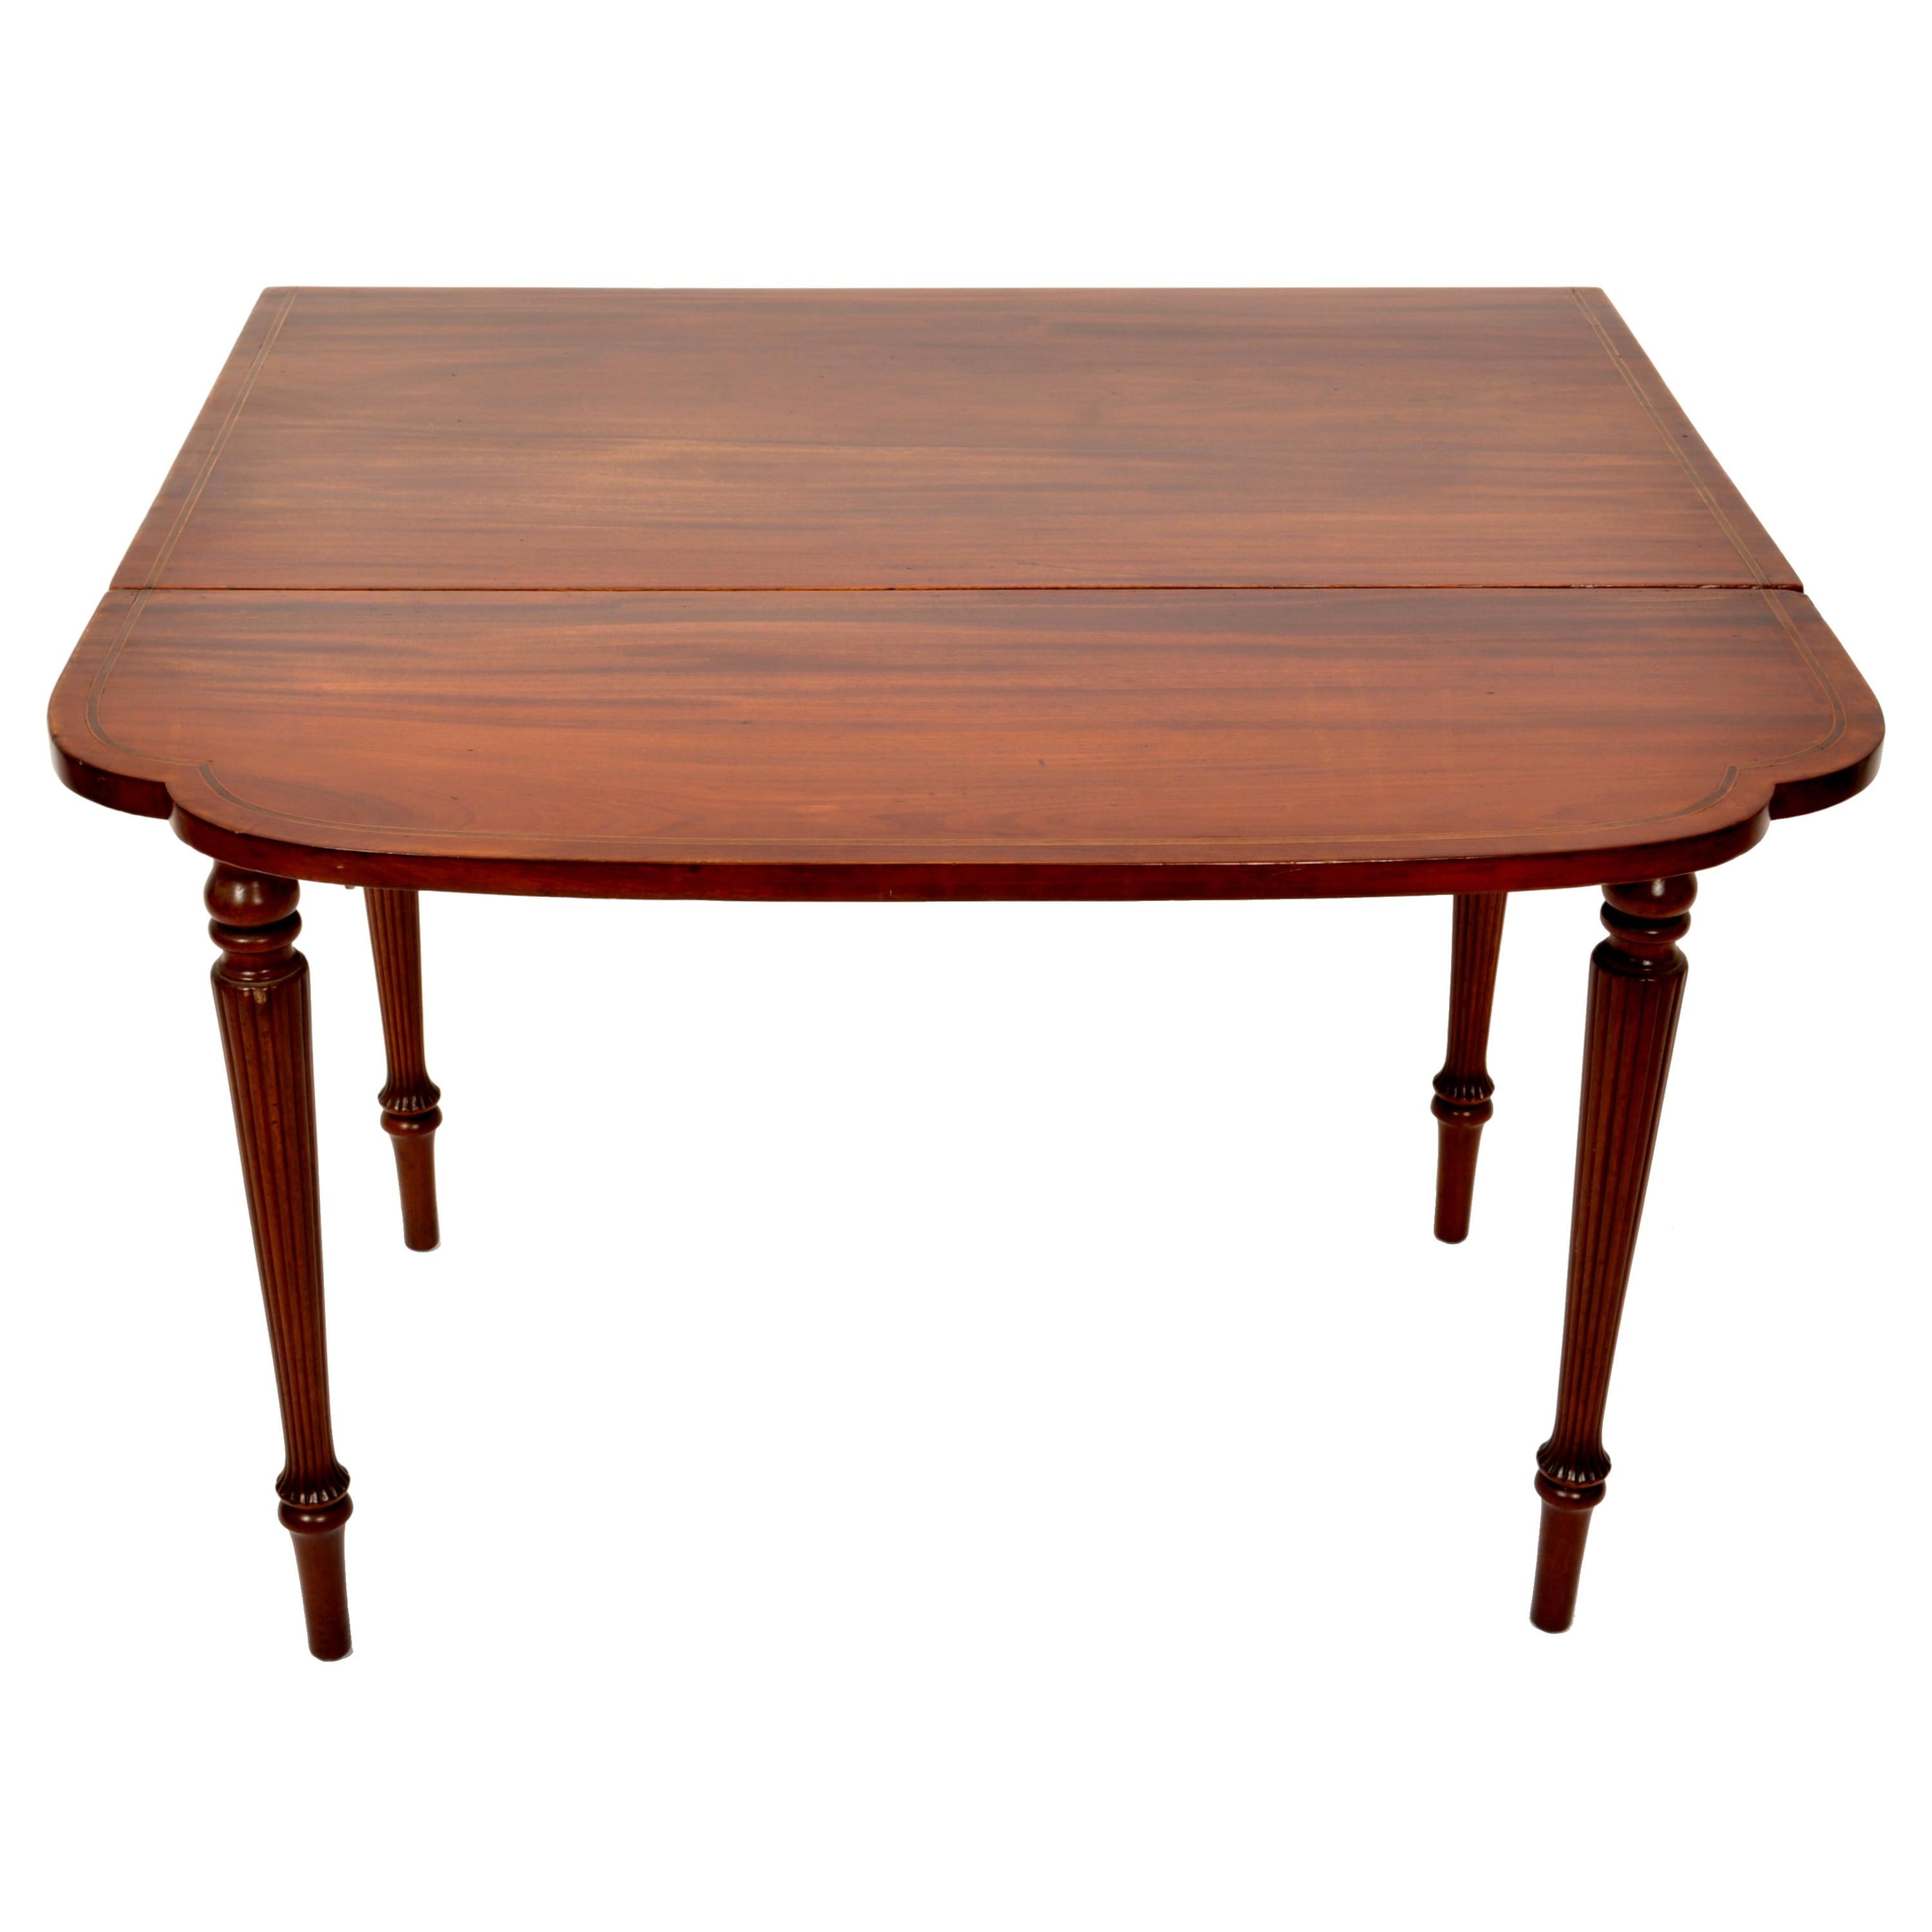 Antique American Federal Sheraton Inlaid Mahogany Pembroke Table New York 1790 For Sale 2